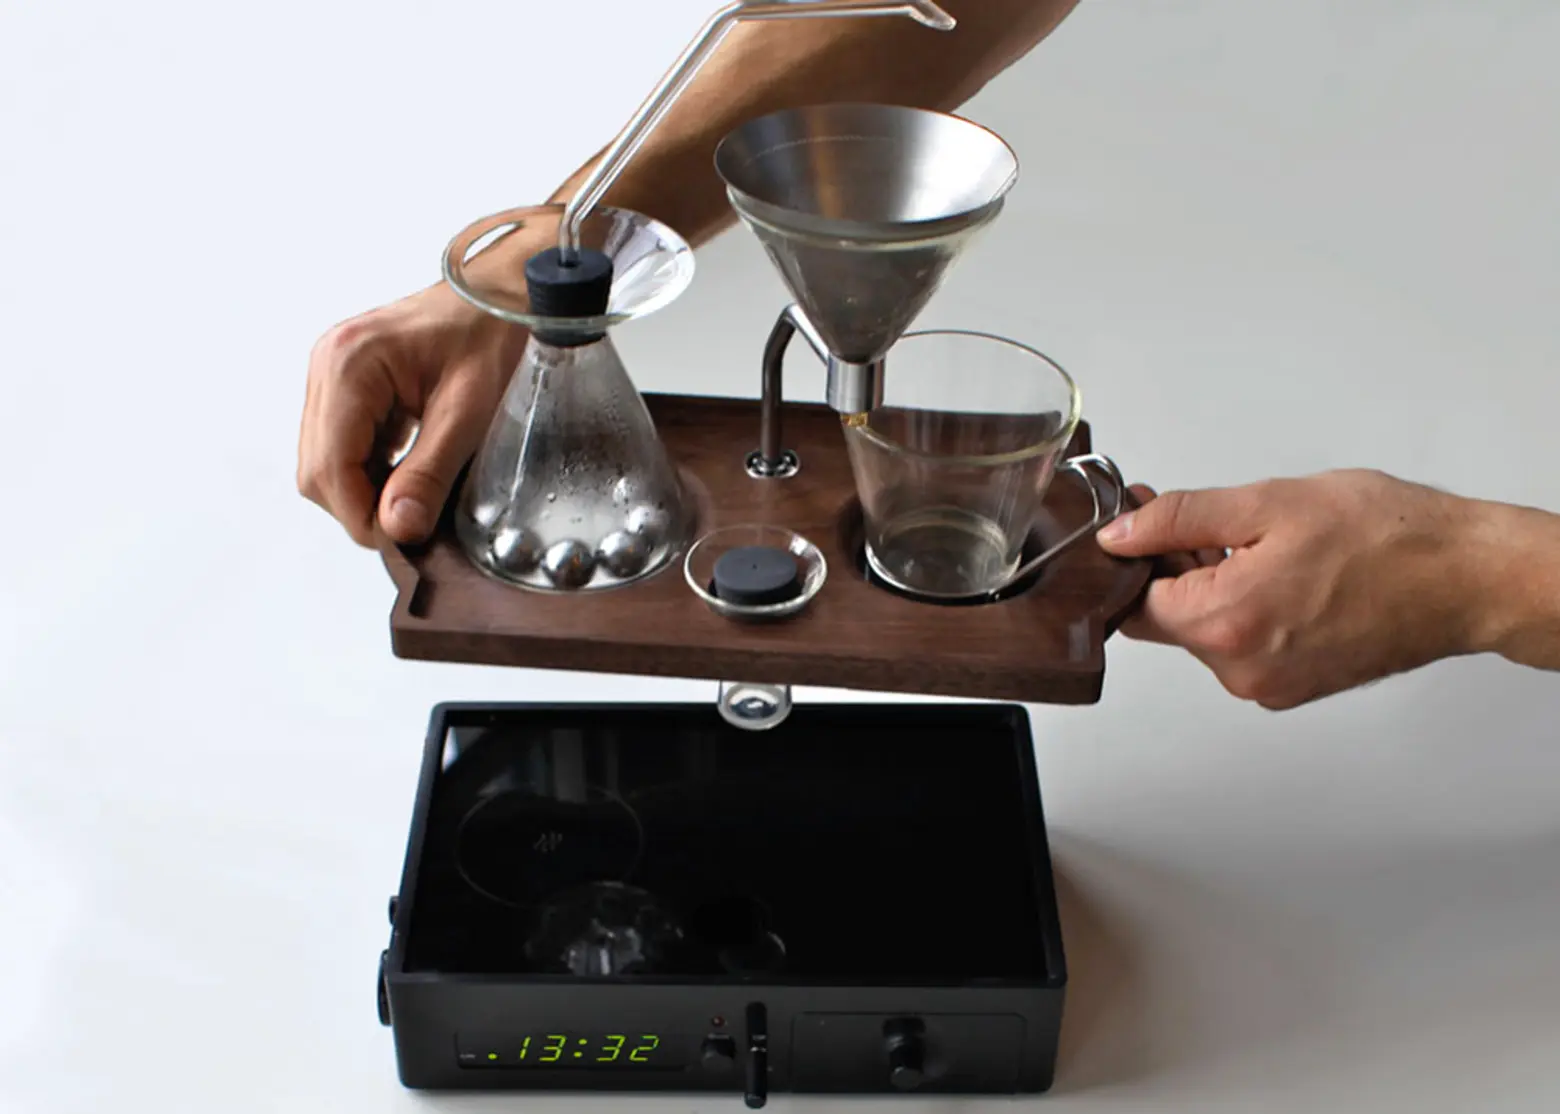 British Designer Joshua Renouf Creates an Hybrid Coffee Brewer-Alarm Clock  That Wakes You Up With a Freshly Brewed Cup